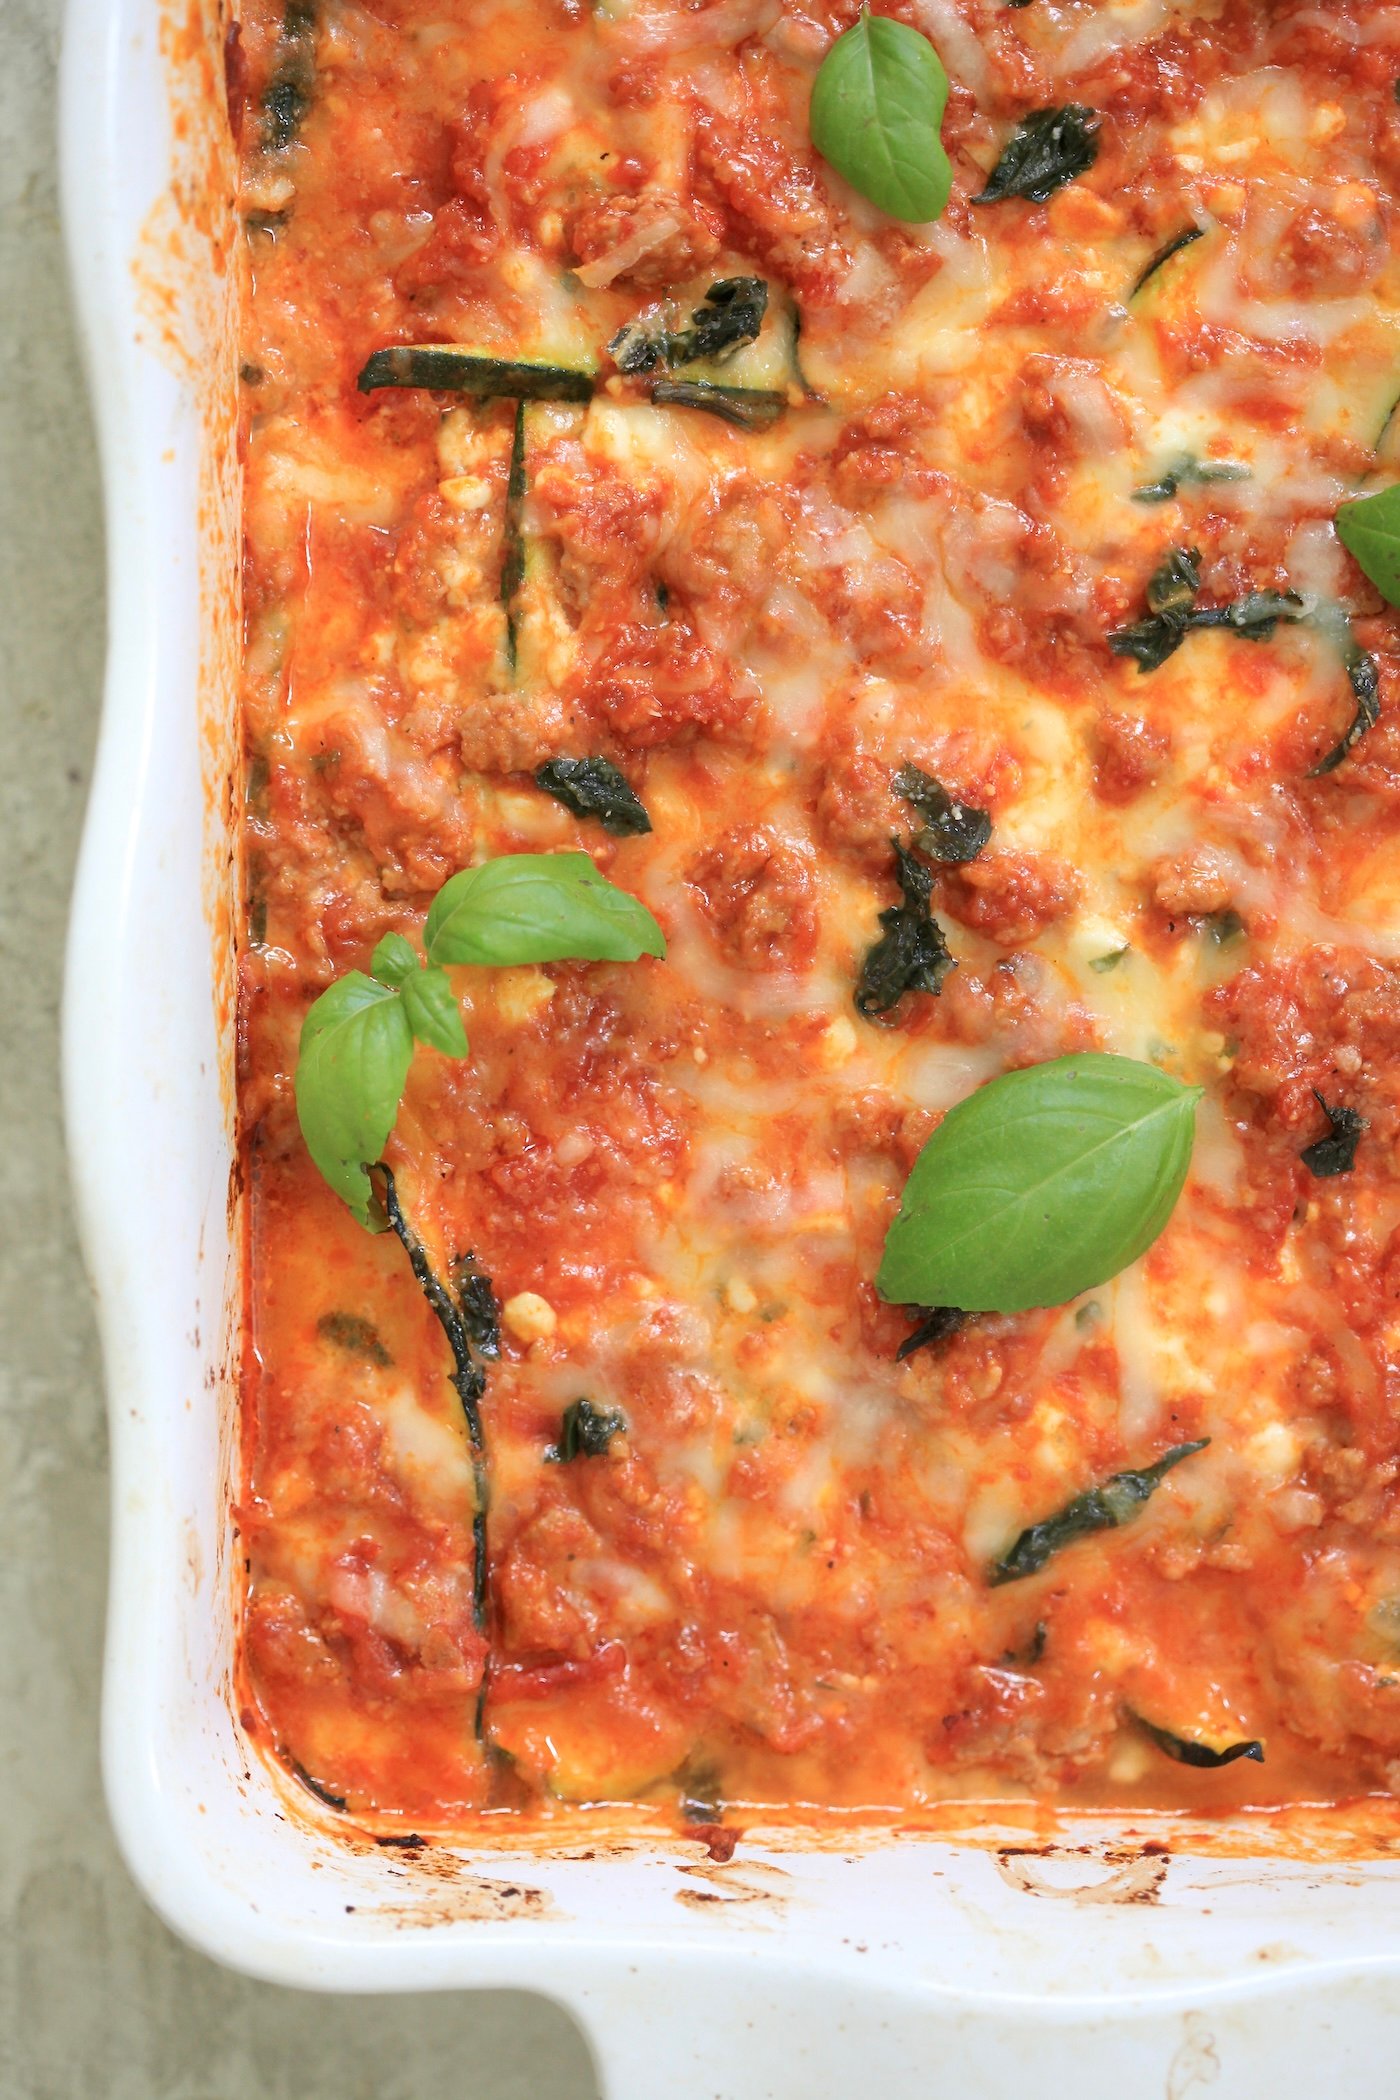 Zucchini Lasagna with Turkey (and cottage cheese!)